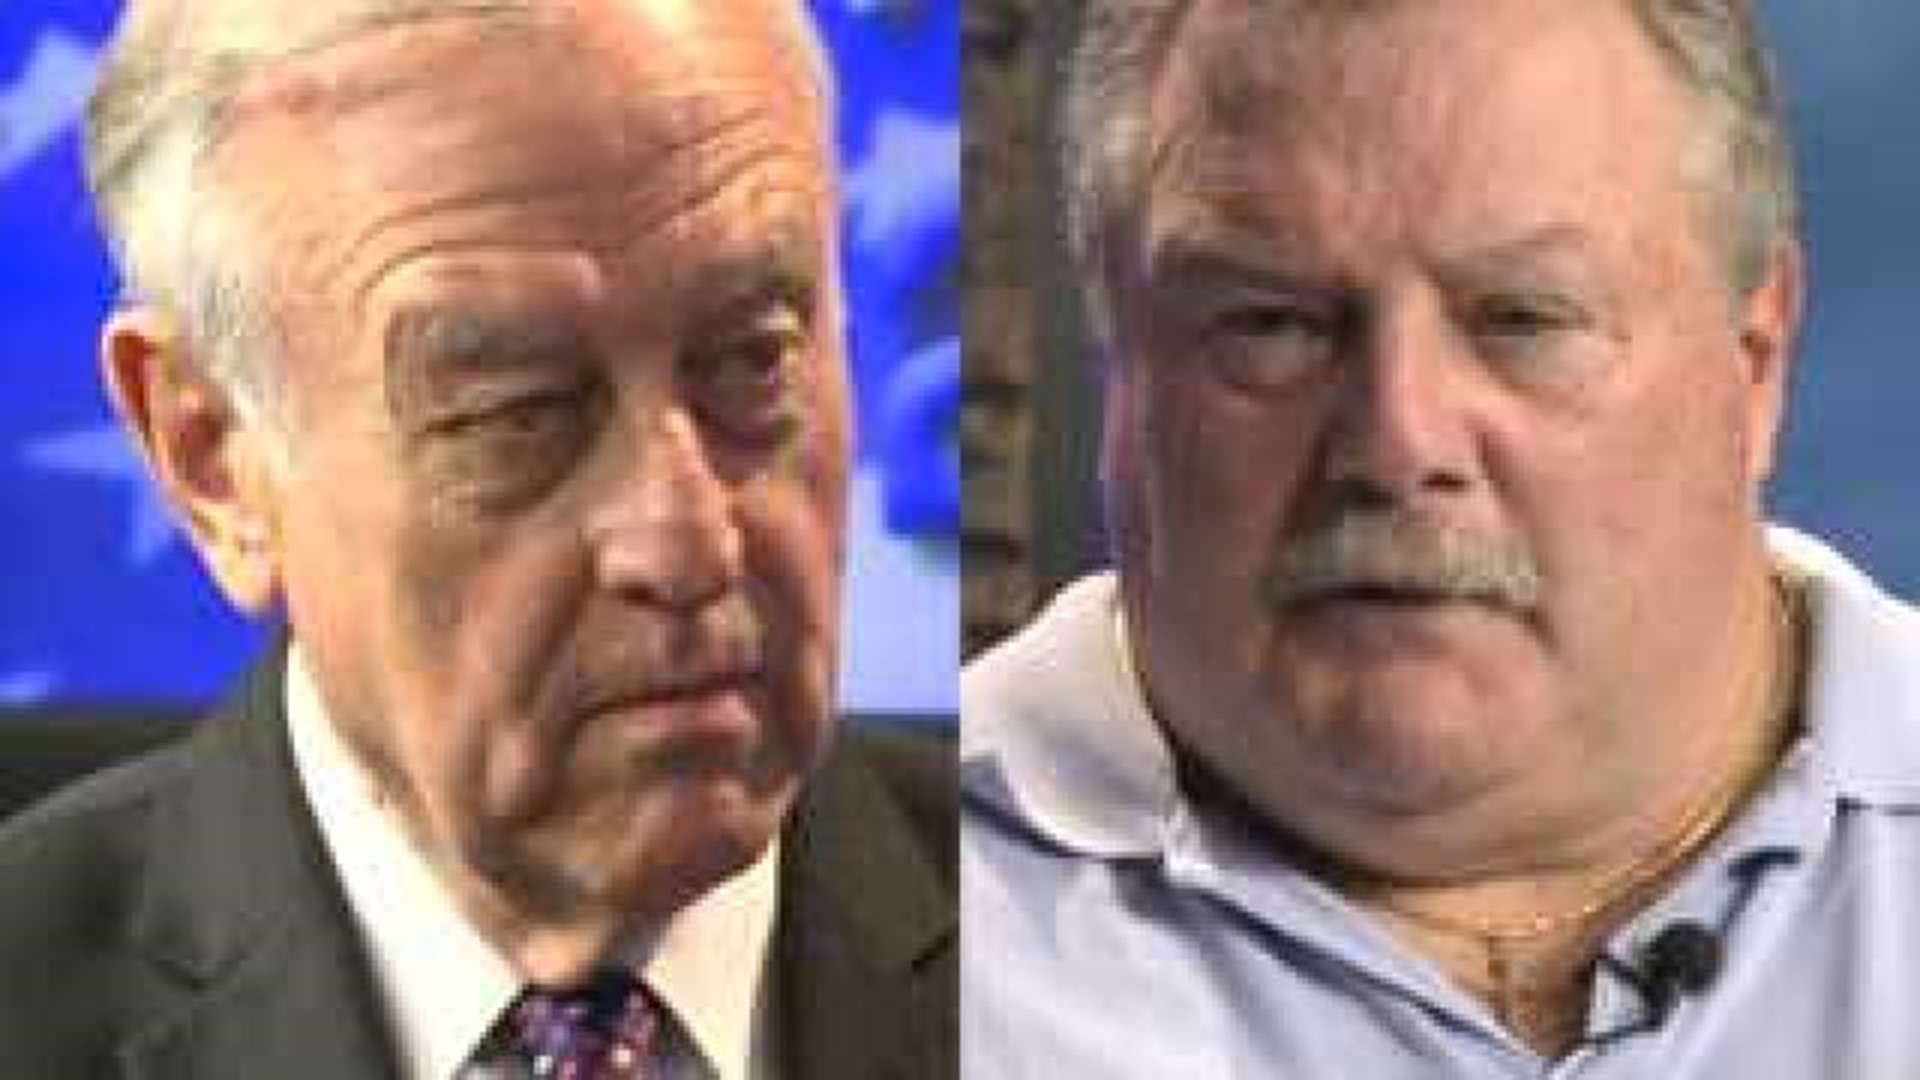 Mayoral candidates discuss Davenport's issues